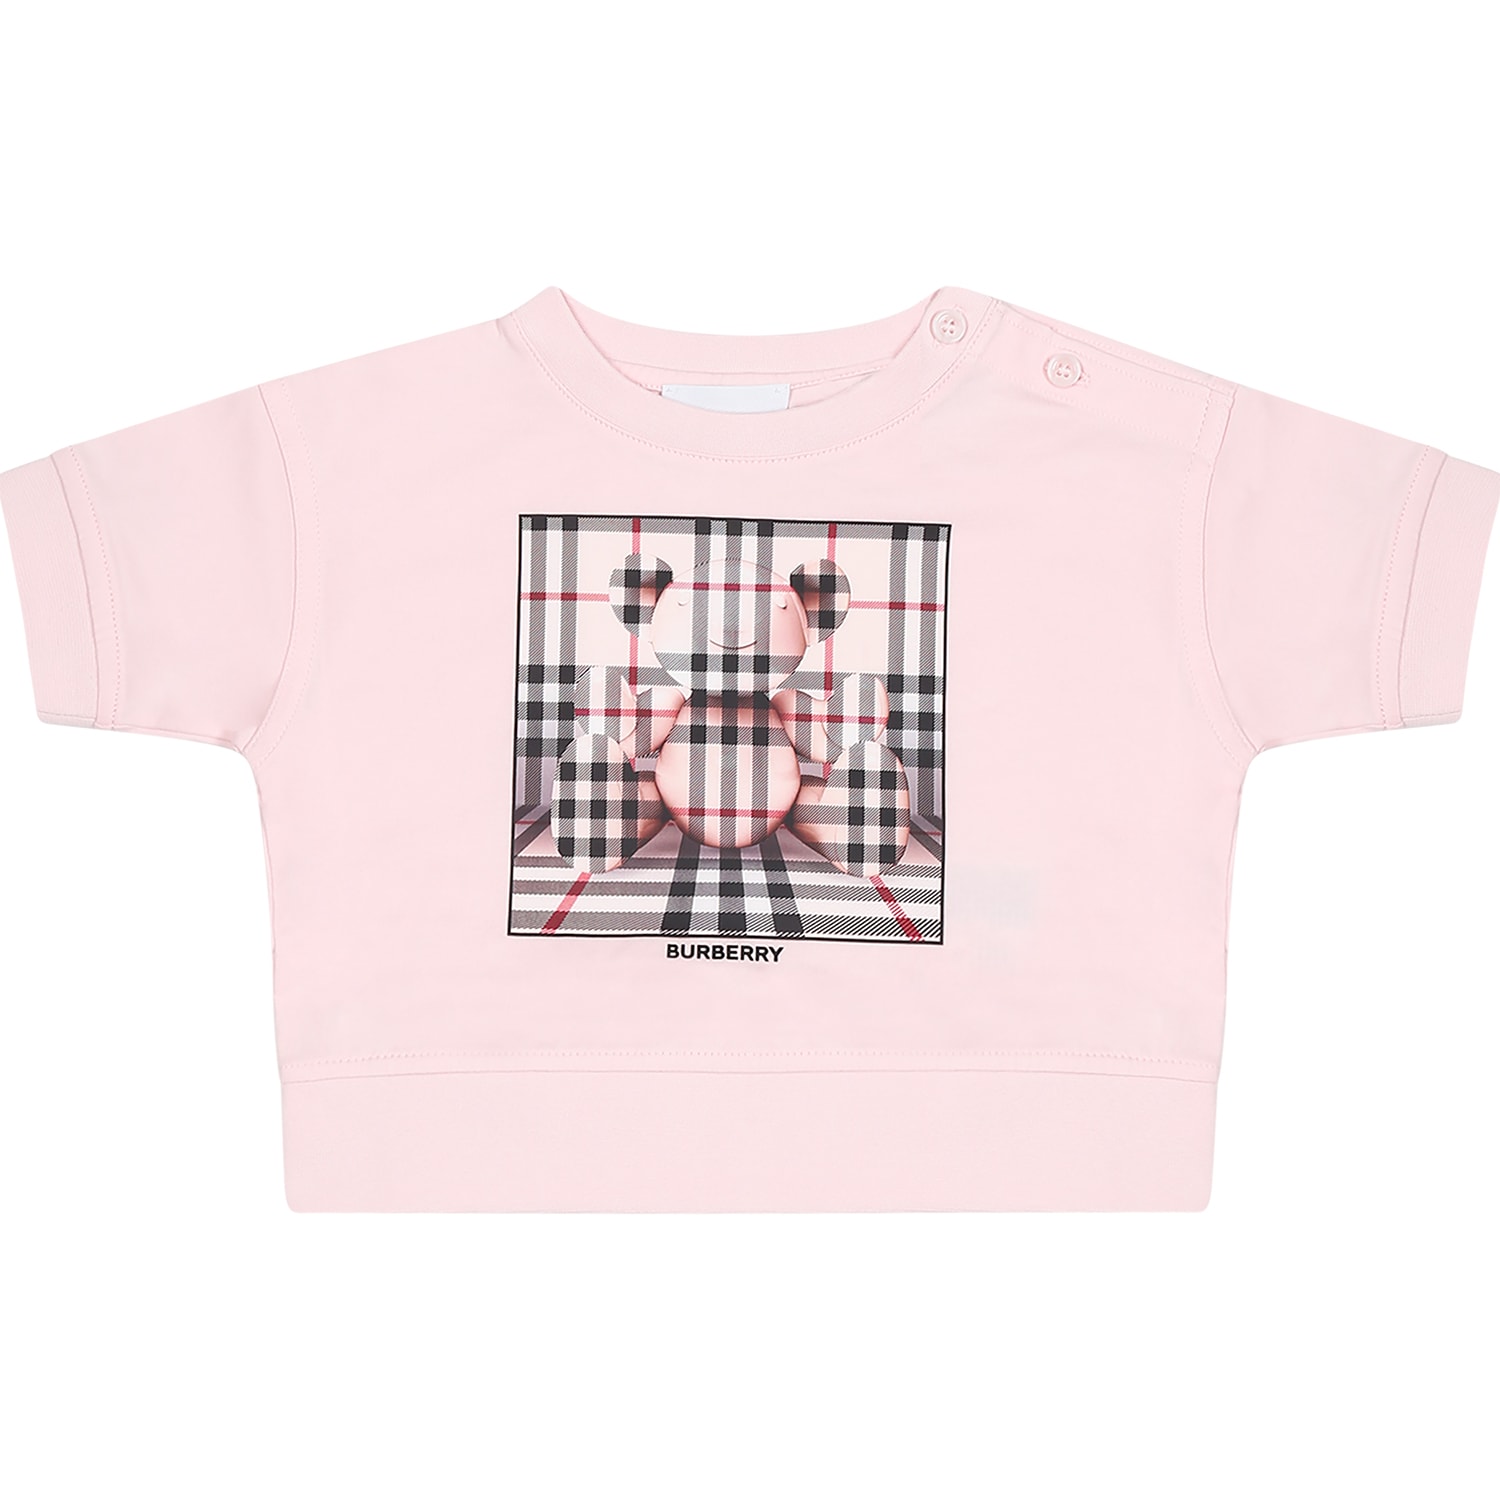 BURBERRY PINK T-SHIRT FOR NEWBORN WITH LOGO PRINT